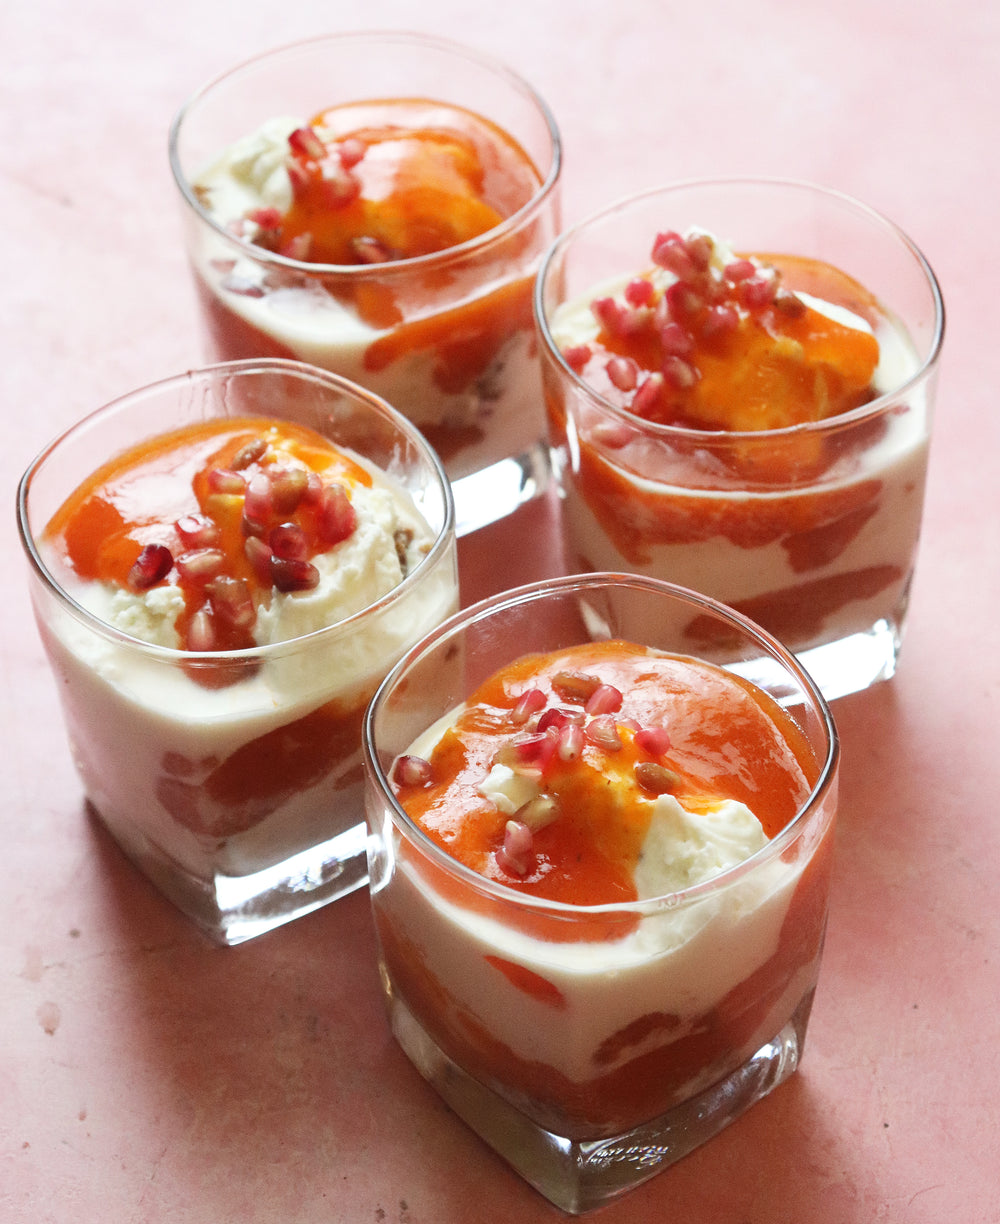 Persimmon Trifle